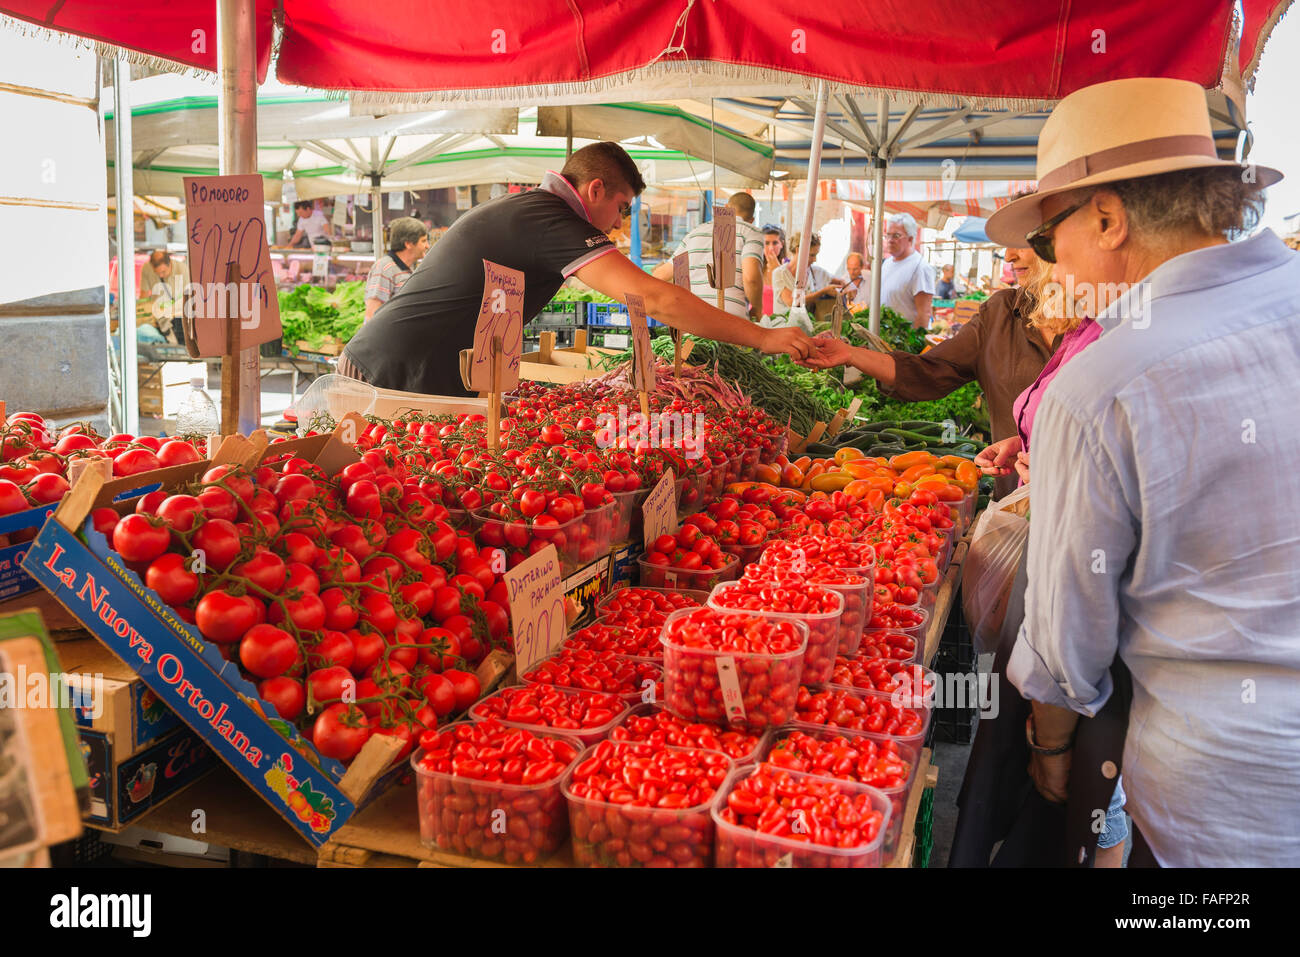 Food Sicily people, view of people shopping for fresh tomatoes in the market on Ortigia island, Syracuse (SIracusa), Sicily. Stock Photo